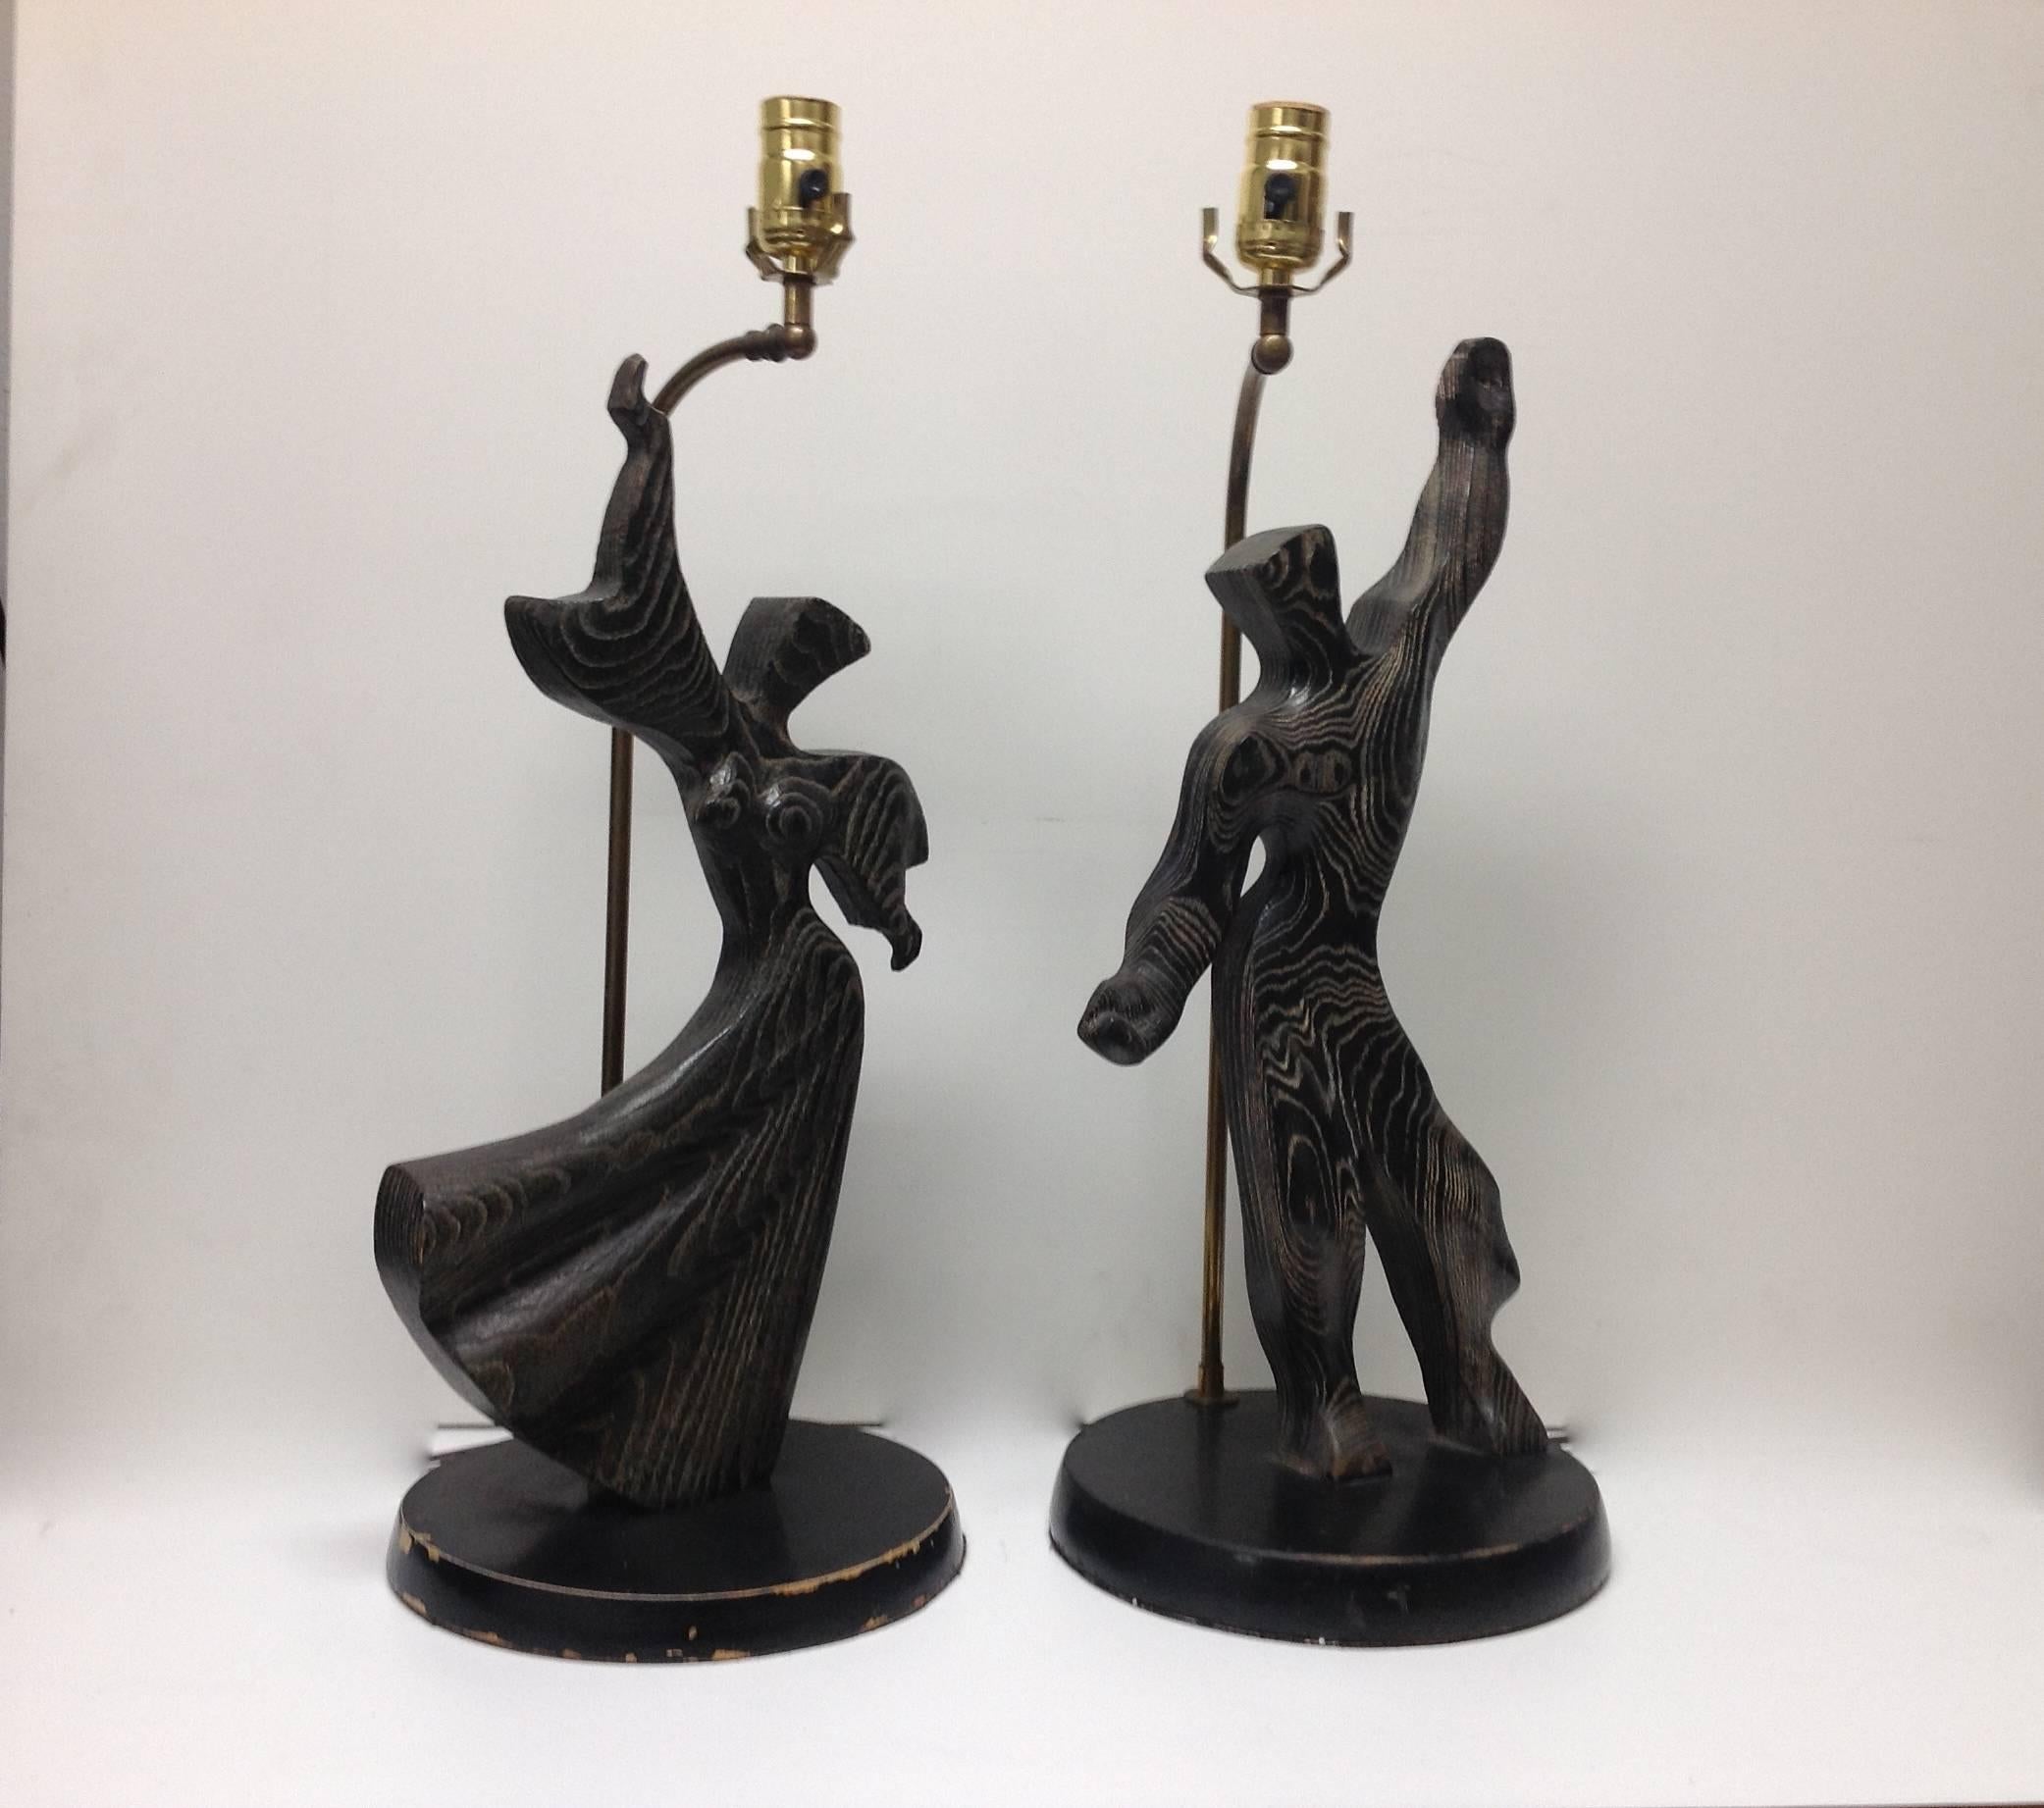 Fantastic pair of solid oak male/ female lamps in a cerused finish. Wonderful and fluid in their movement, these lamps are mounted on round black painted wood bases which show natural wear. Original working condition, lamps have not been altered.